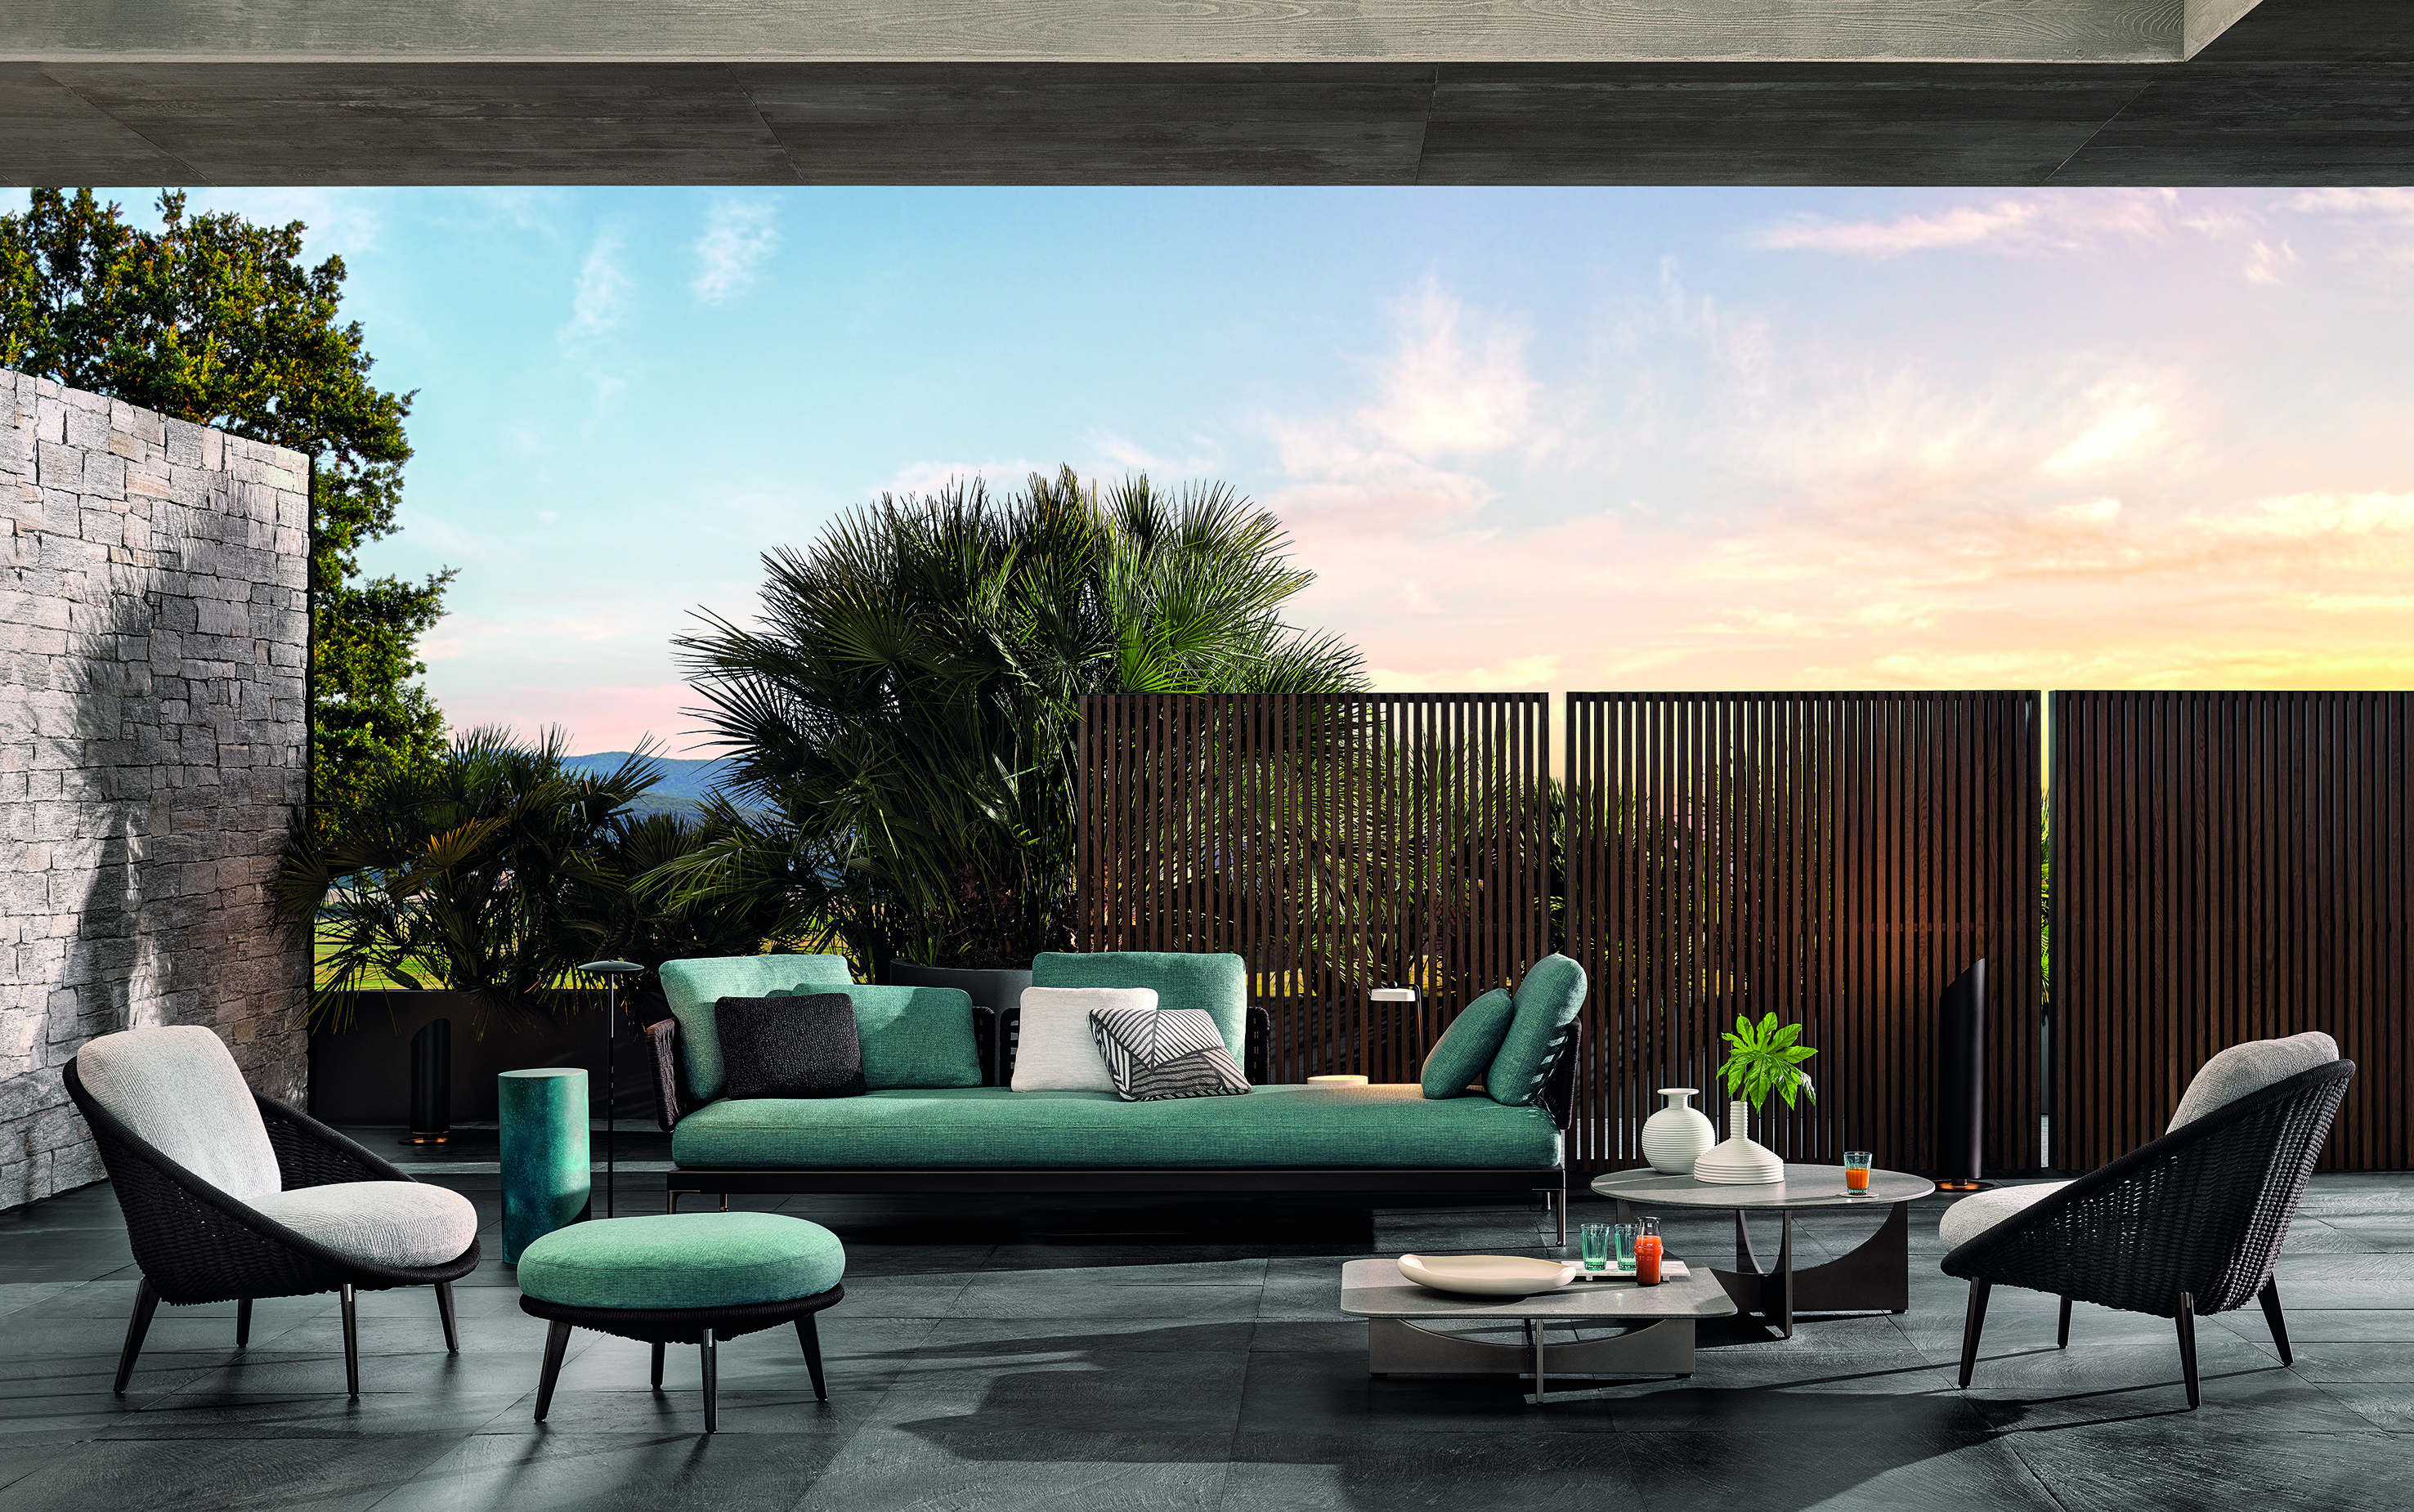 Andante showcases exclusive ART and full Minotti collection patio